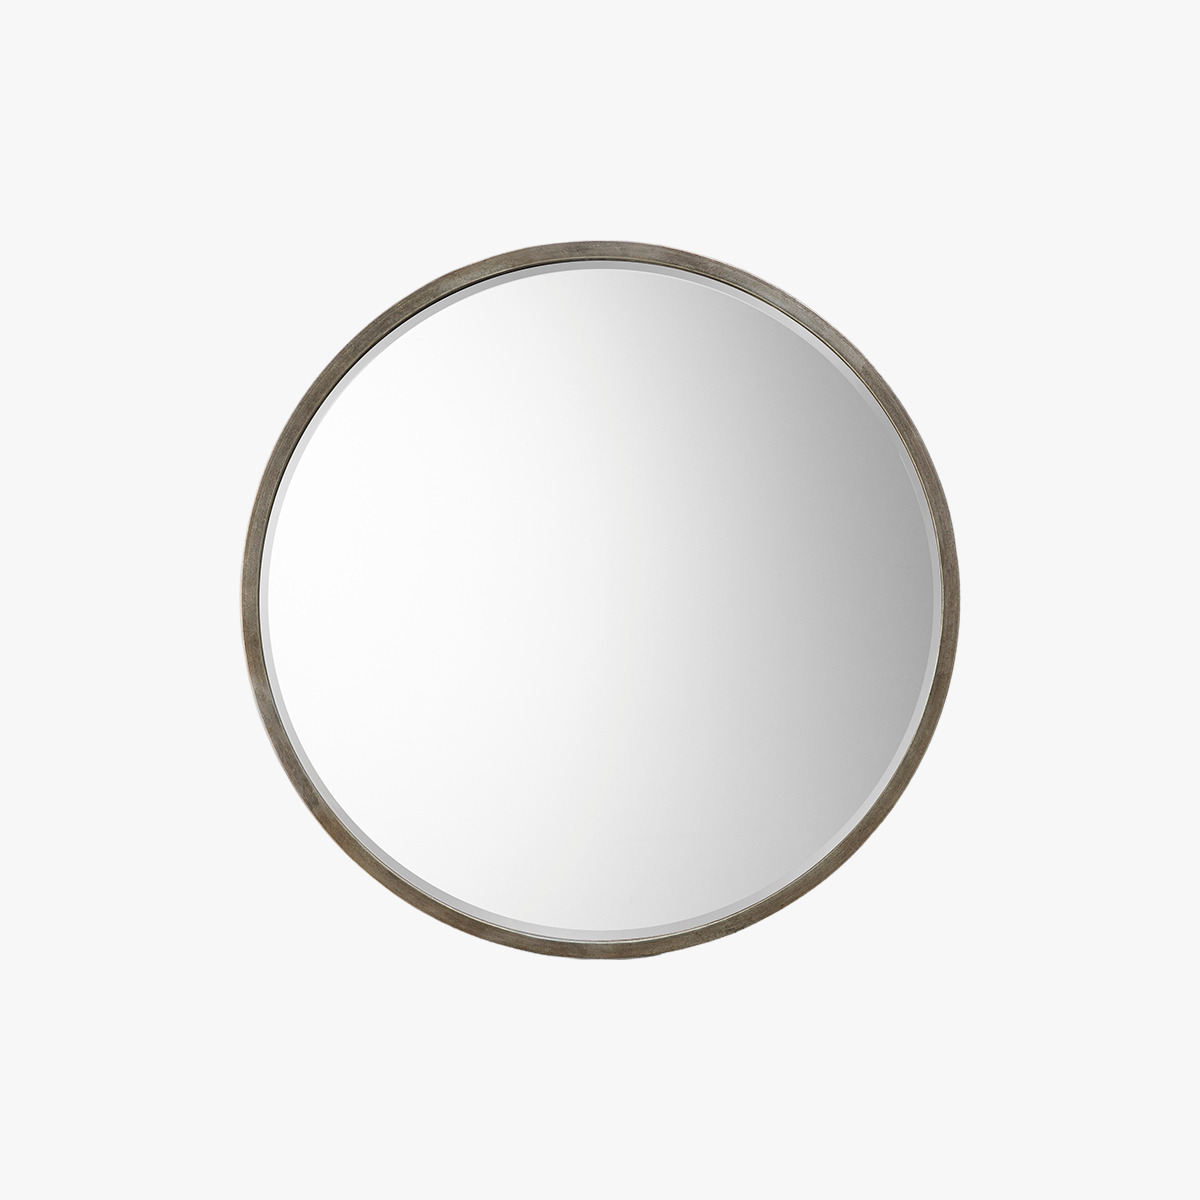 Newport Round Mirror in Antique Silver, Large